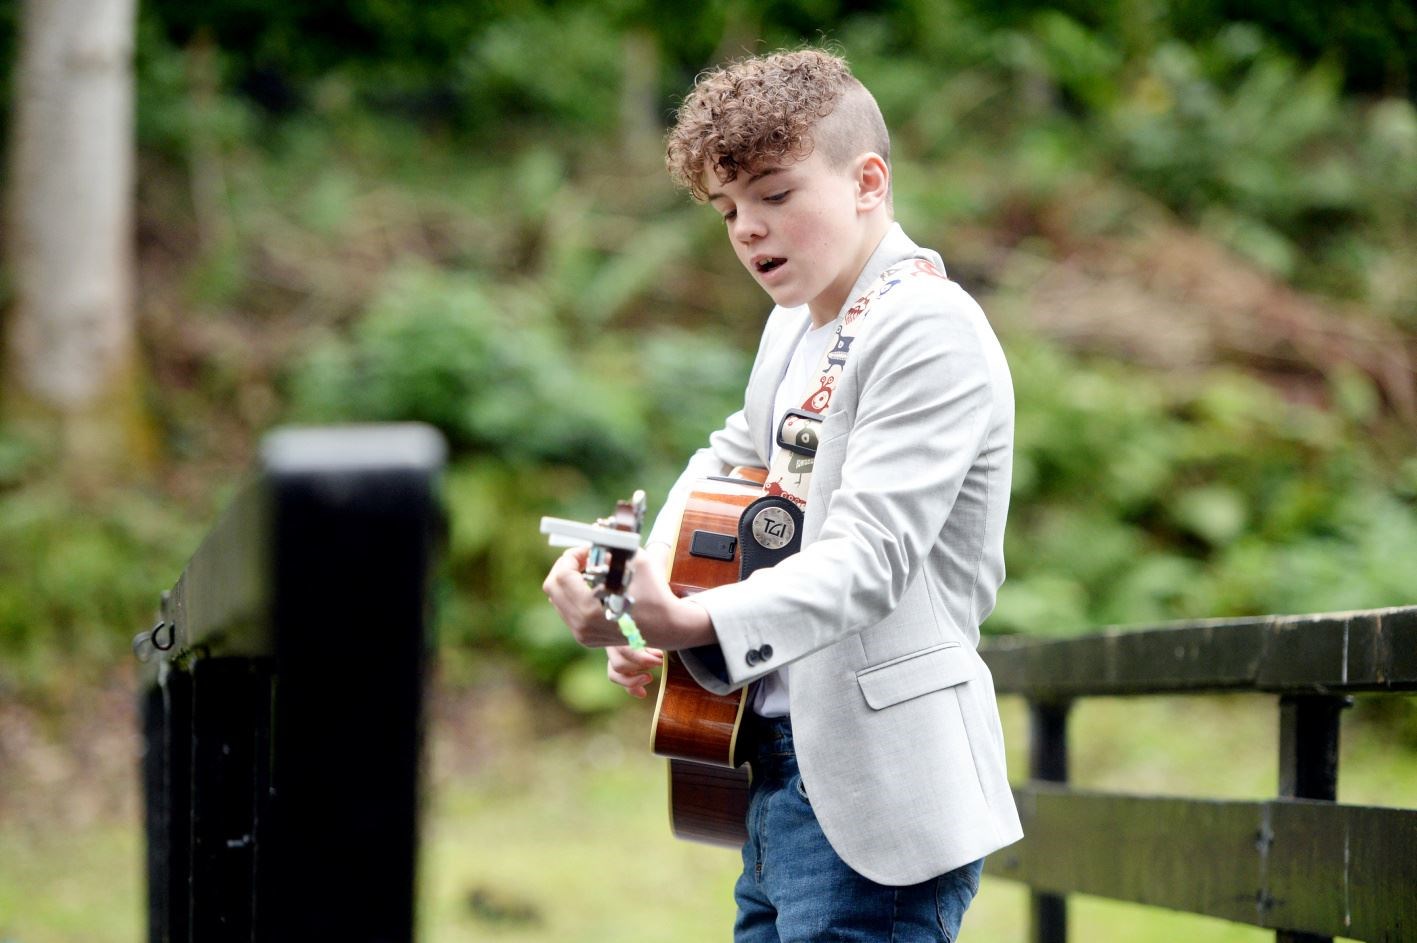 James Macgillivary (13) has already played to thousands of people on stage and busking.